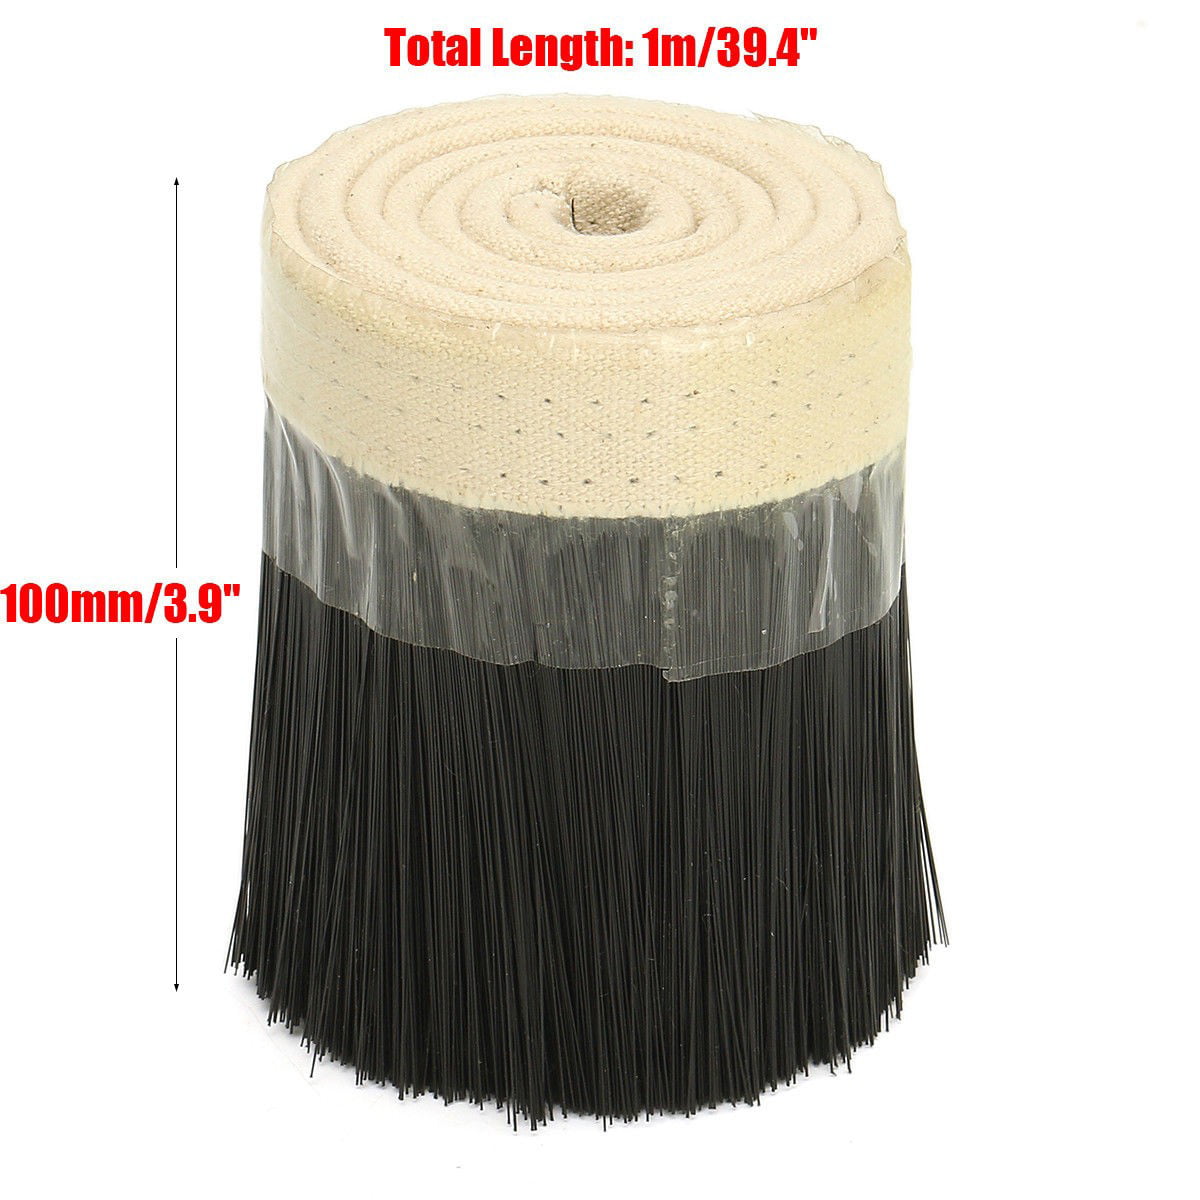 70/100mm Nylon Brush Vacuum Cleaner Engraving Machine Dust Cover For CNC Router 